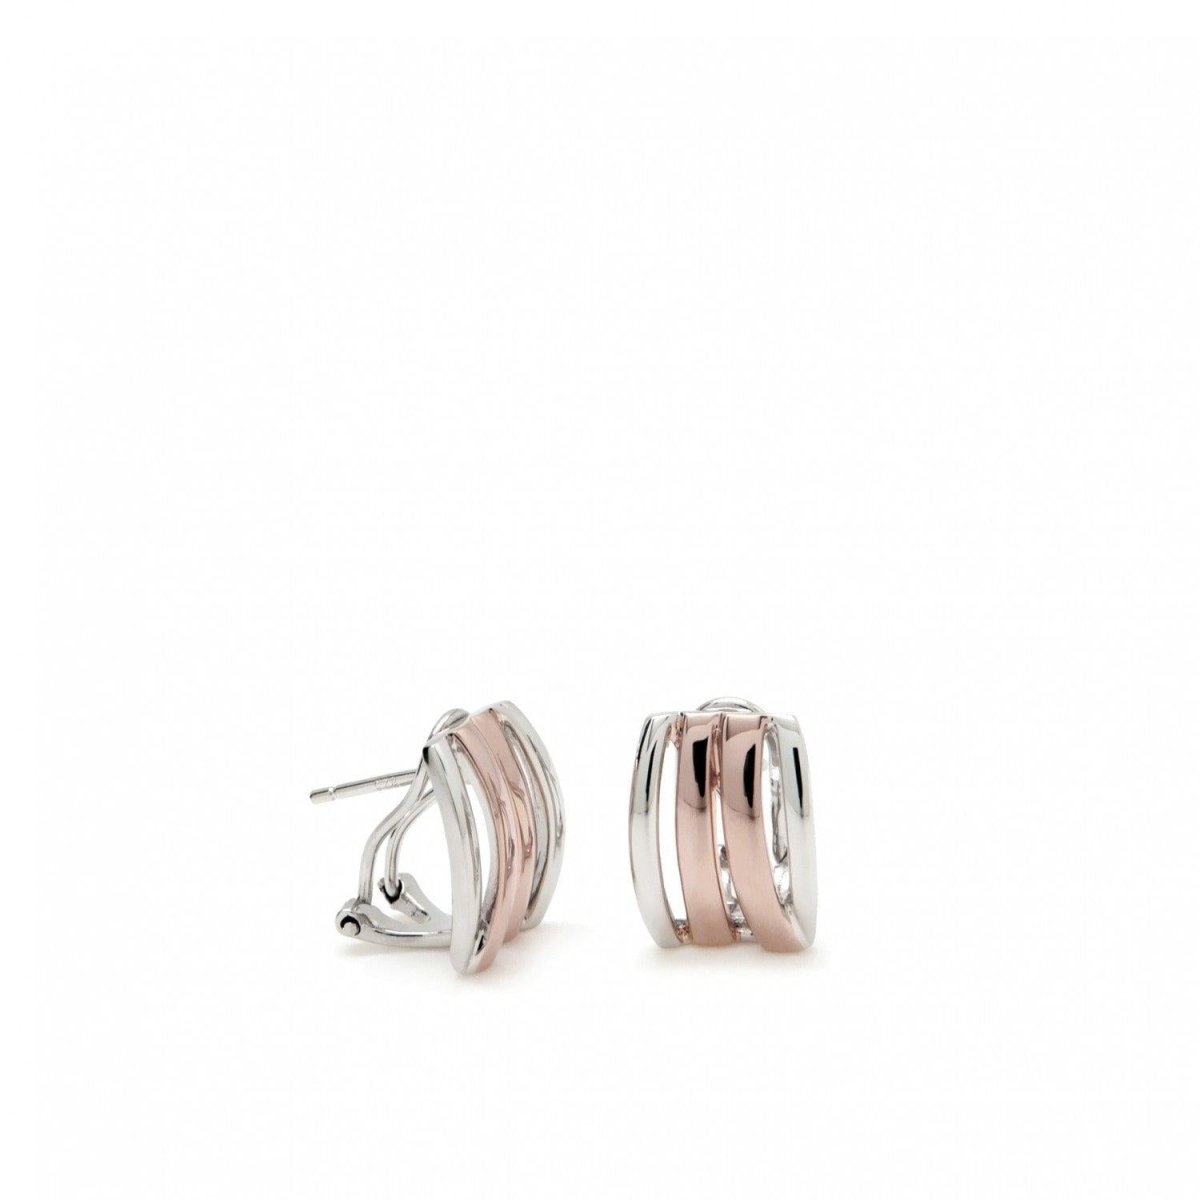 Earrings - Earrings with omega clasp design bicolor rails